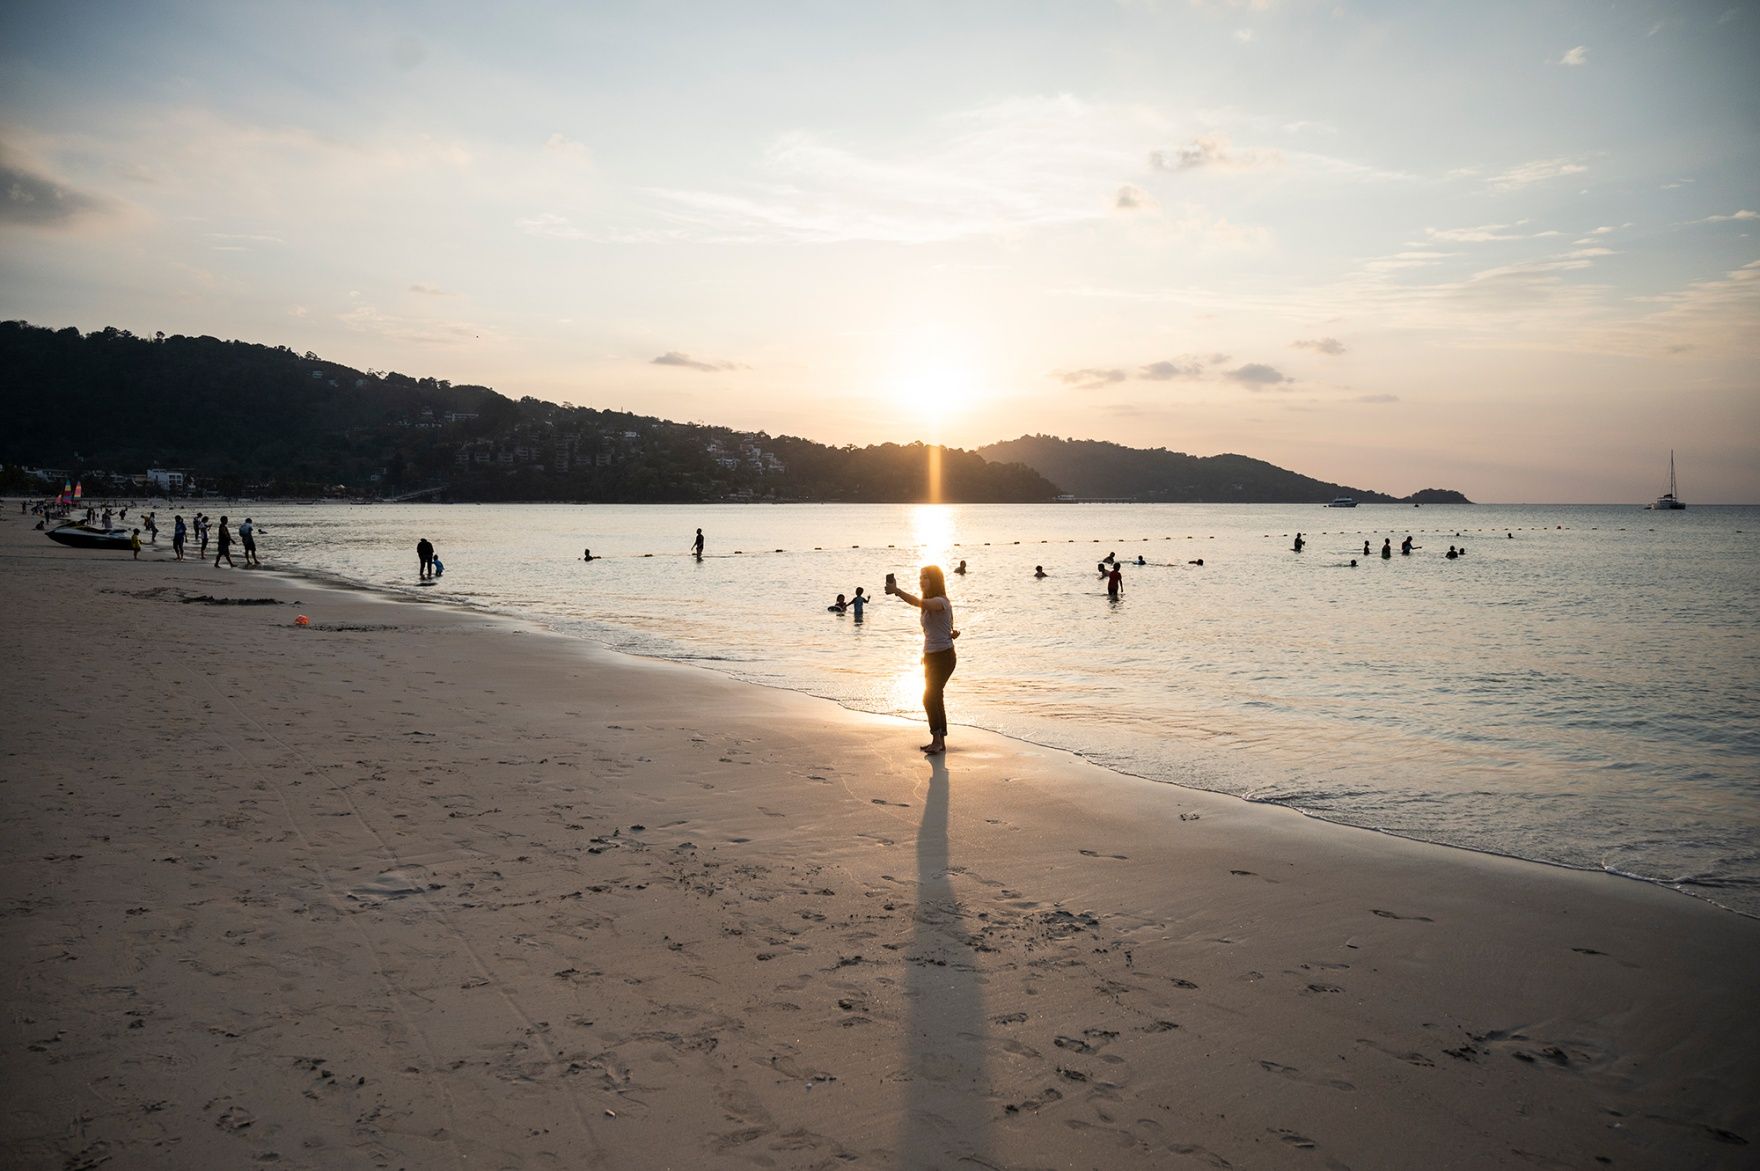 PHUKET, THAILAND - JANUARY 17: A small group of people gather at a relatively empty Patong Beach on January 17, 2021 in Phuket, Thailand. Thailand's tourism-dependent economy was already on life-support before a resurgence of Covid-19 infections, with GDP expected to contract by six per cent in 2020, millions unemployed and record household debt continuing to soar. A fresh lockdown to combat the virus has thrown broad parts of the economy into an extended decline. (Photo by Sirachai Arunrugstichai/Getty Images)